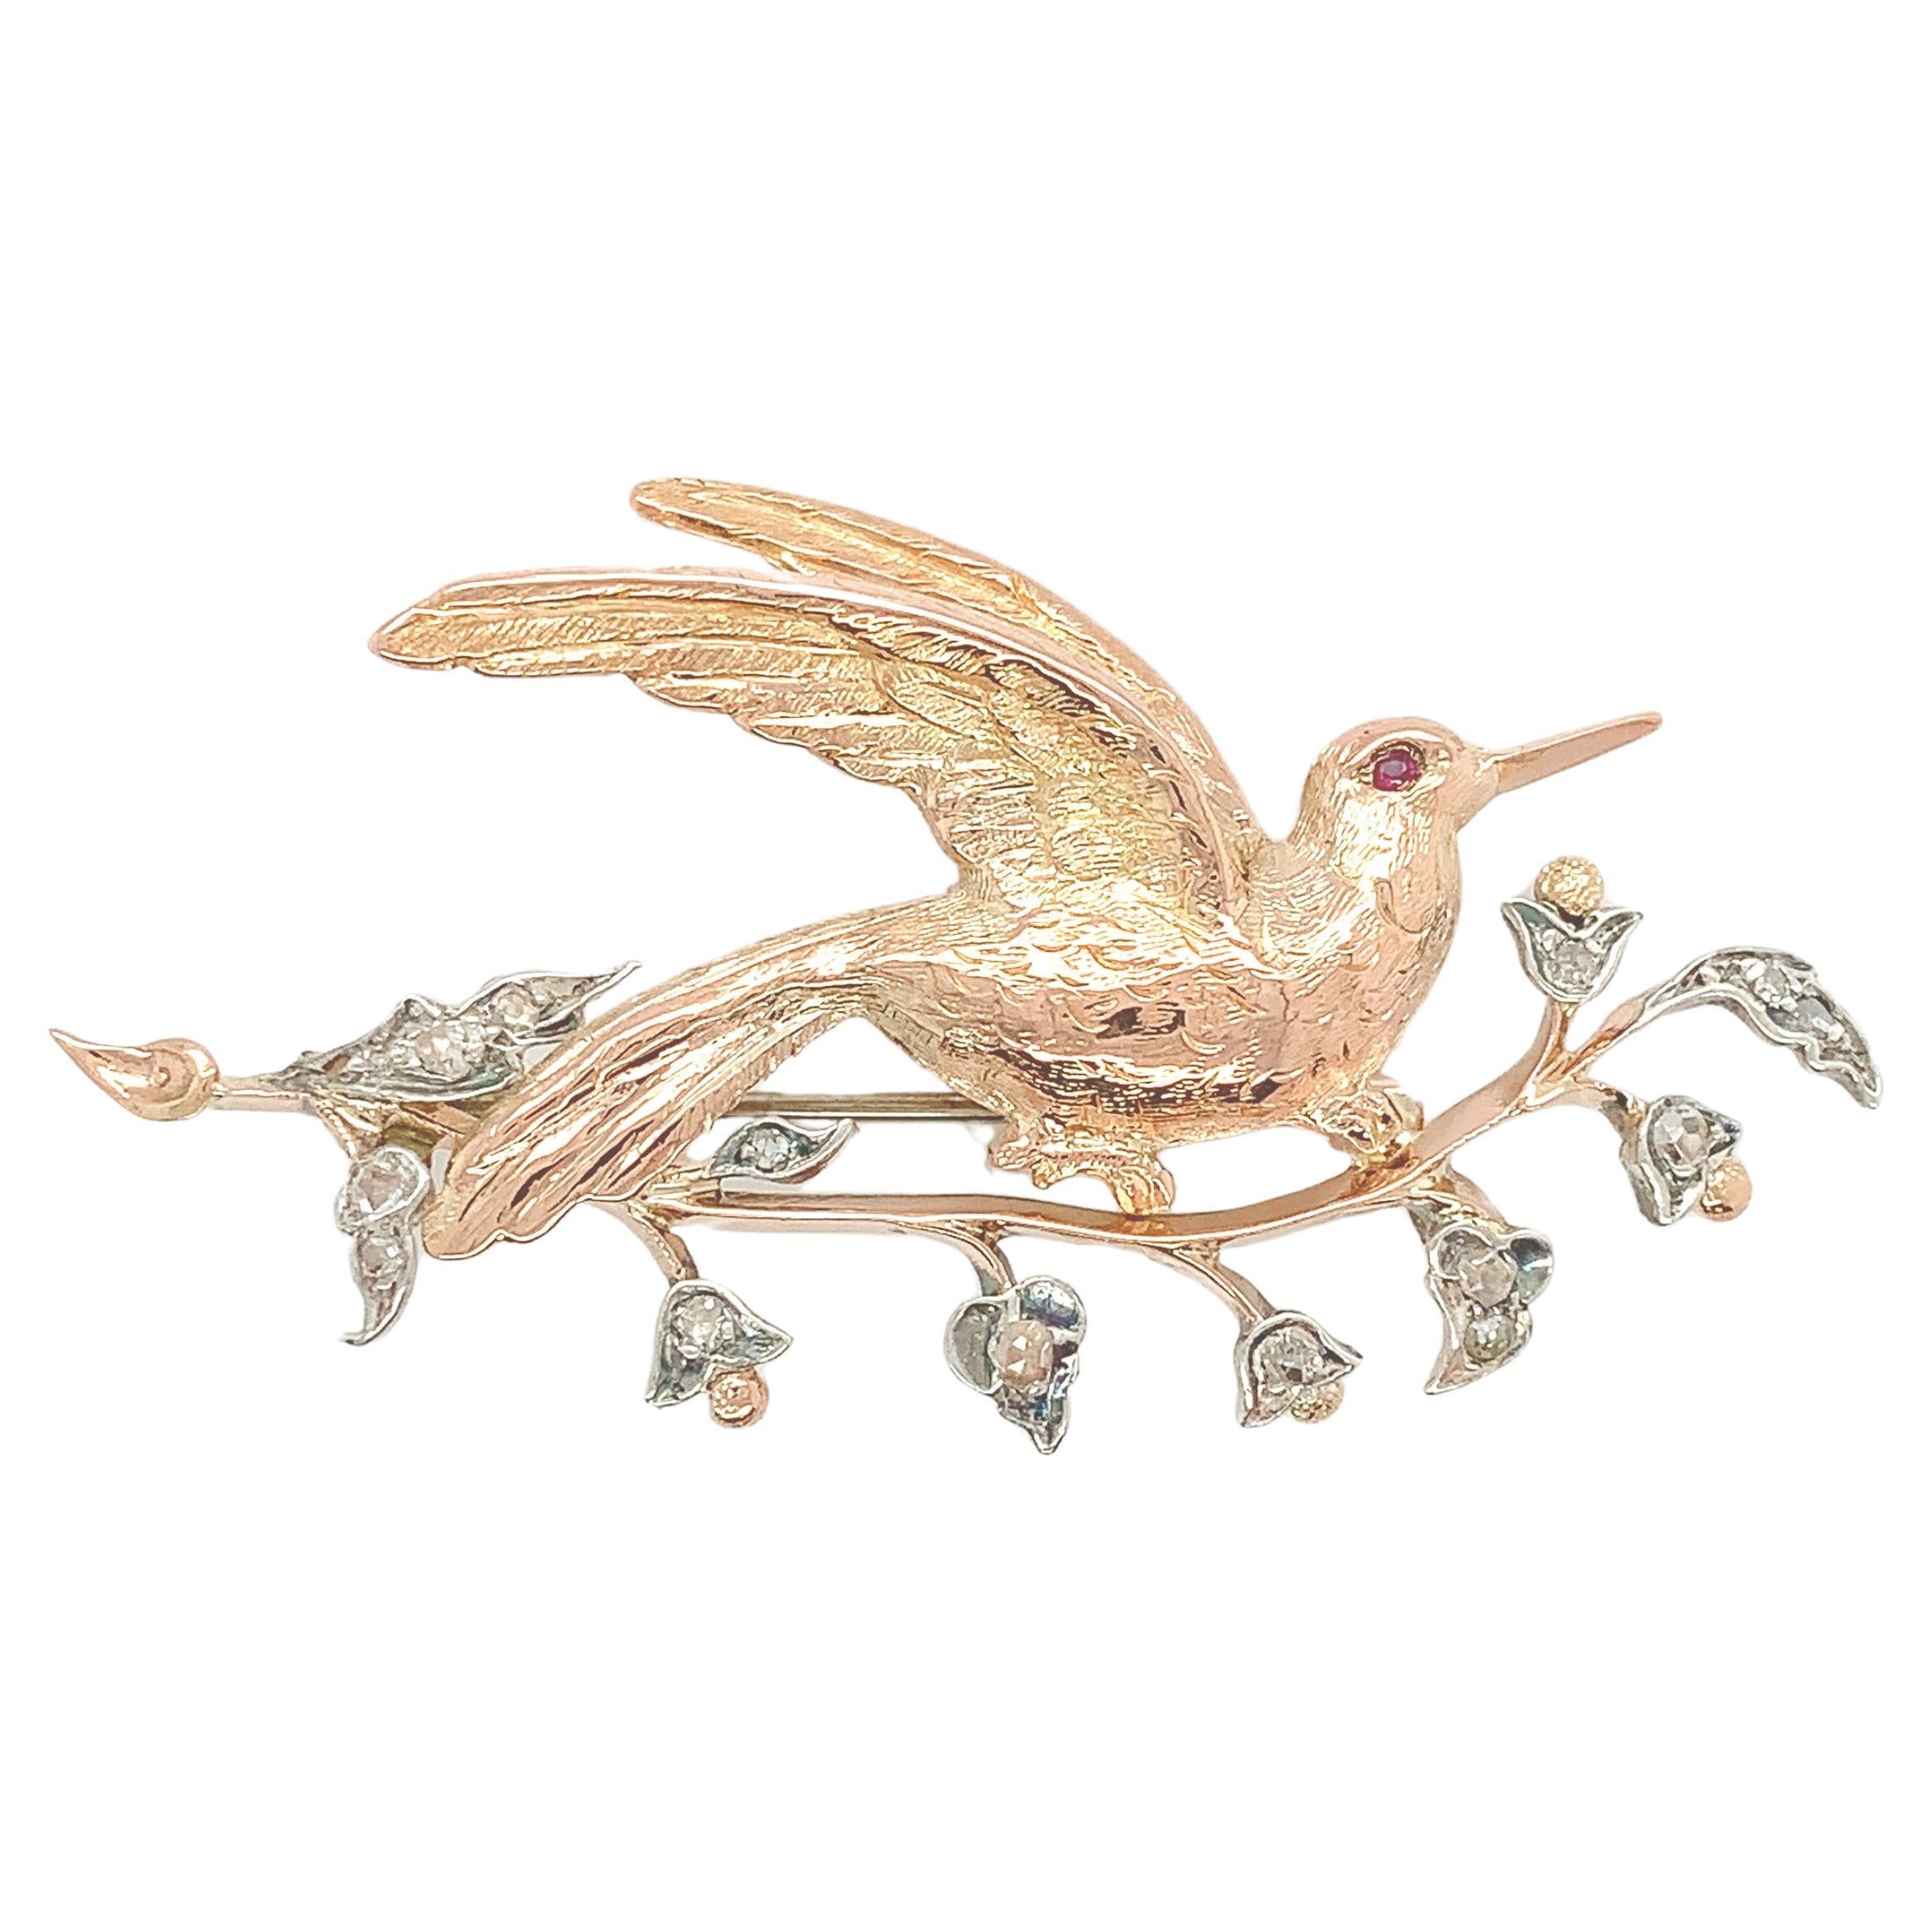 14K Gold and Silver Antique Bird Pin Brooch with Diamonds